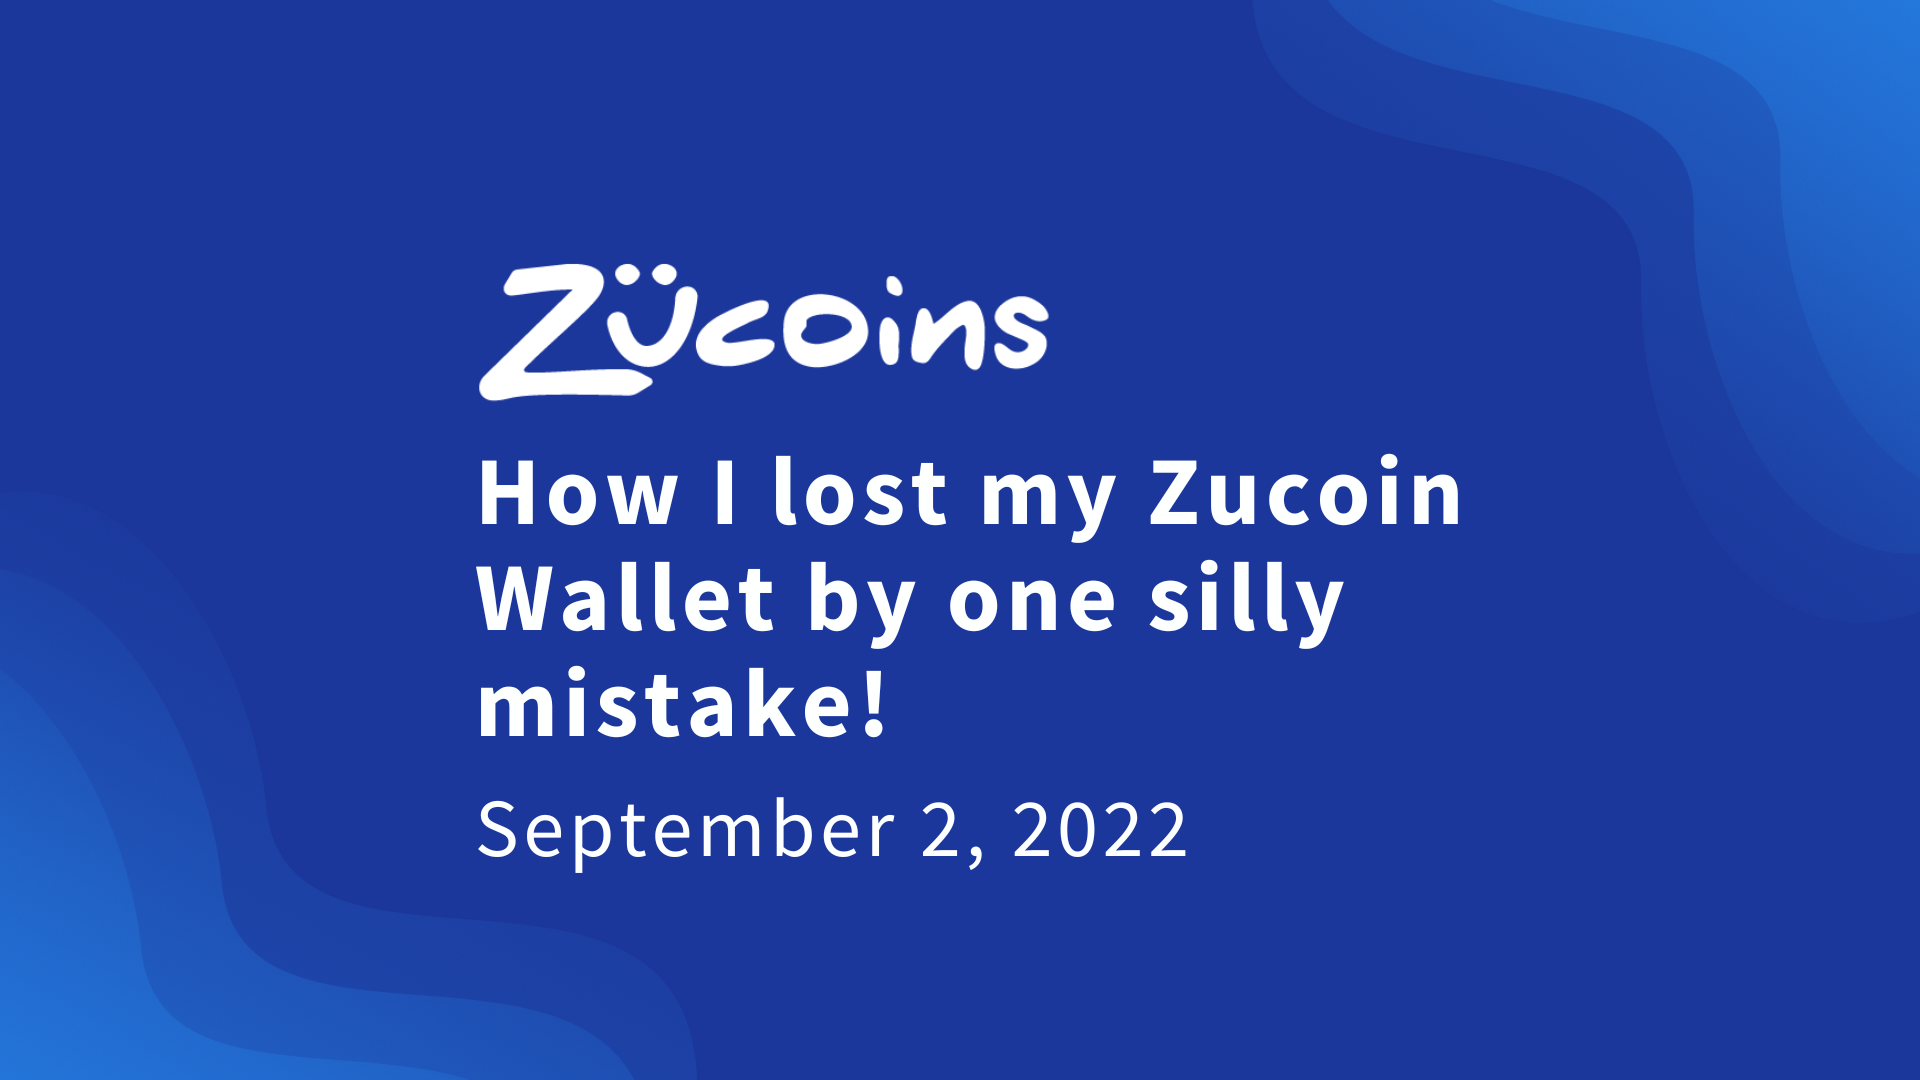 An honest Q&A with a Zucoin buyer who lost their Zucoins